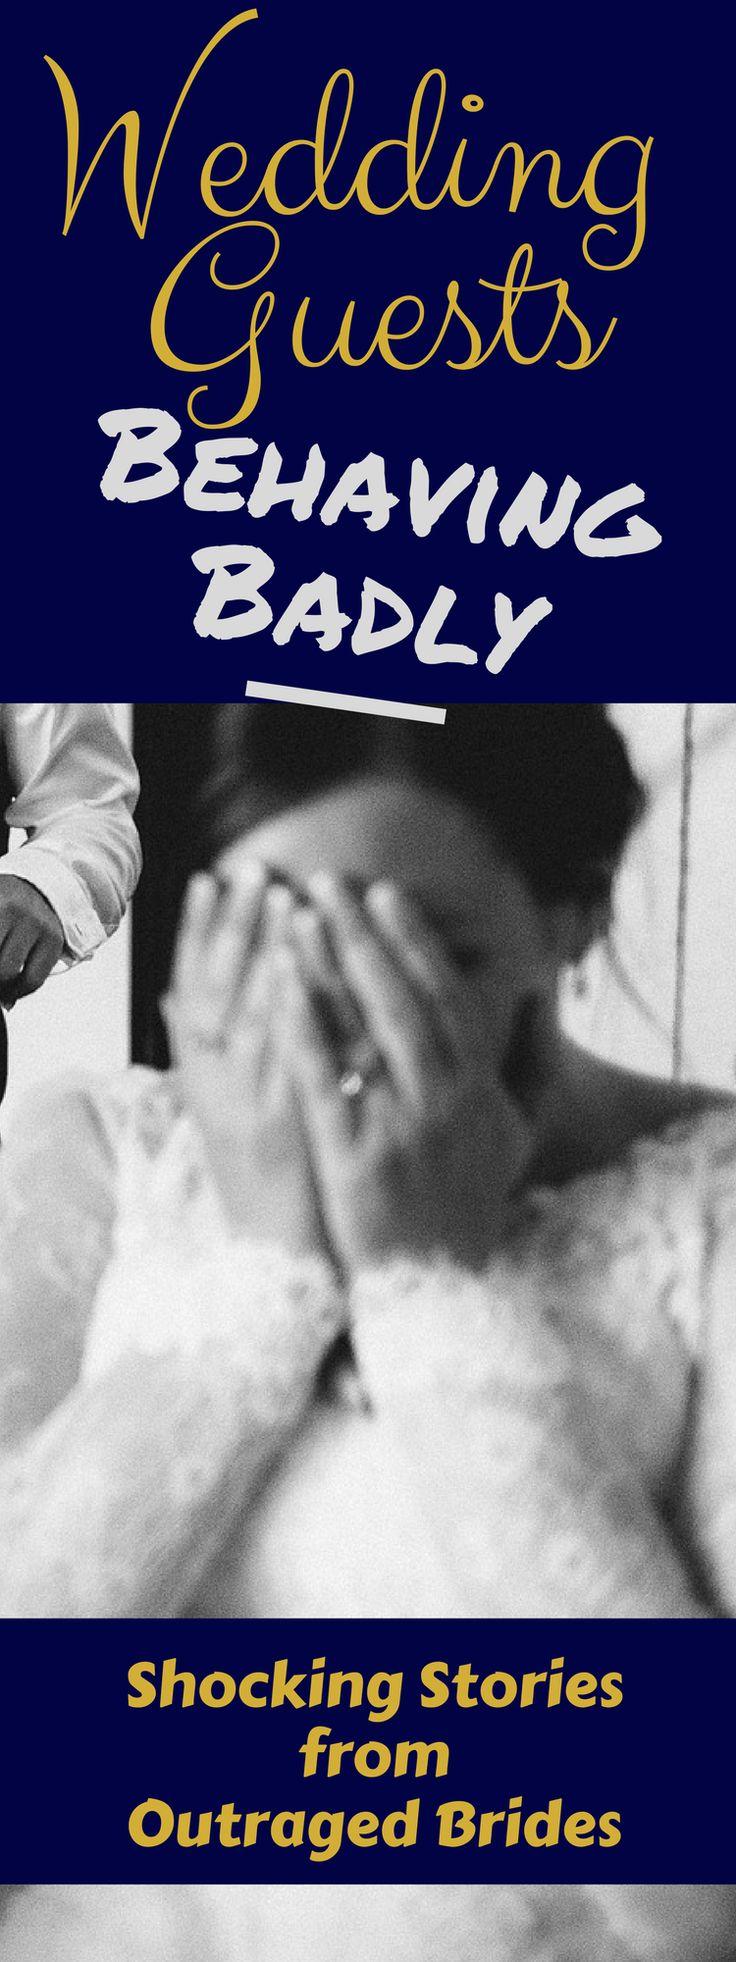 Wedding - Wedding Guests Behaving Badly – Shocking Stories From Outraged Brides